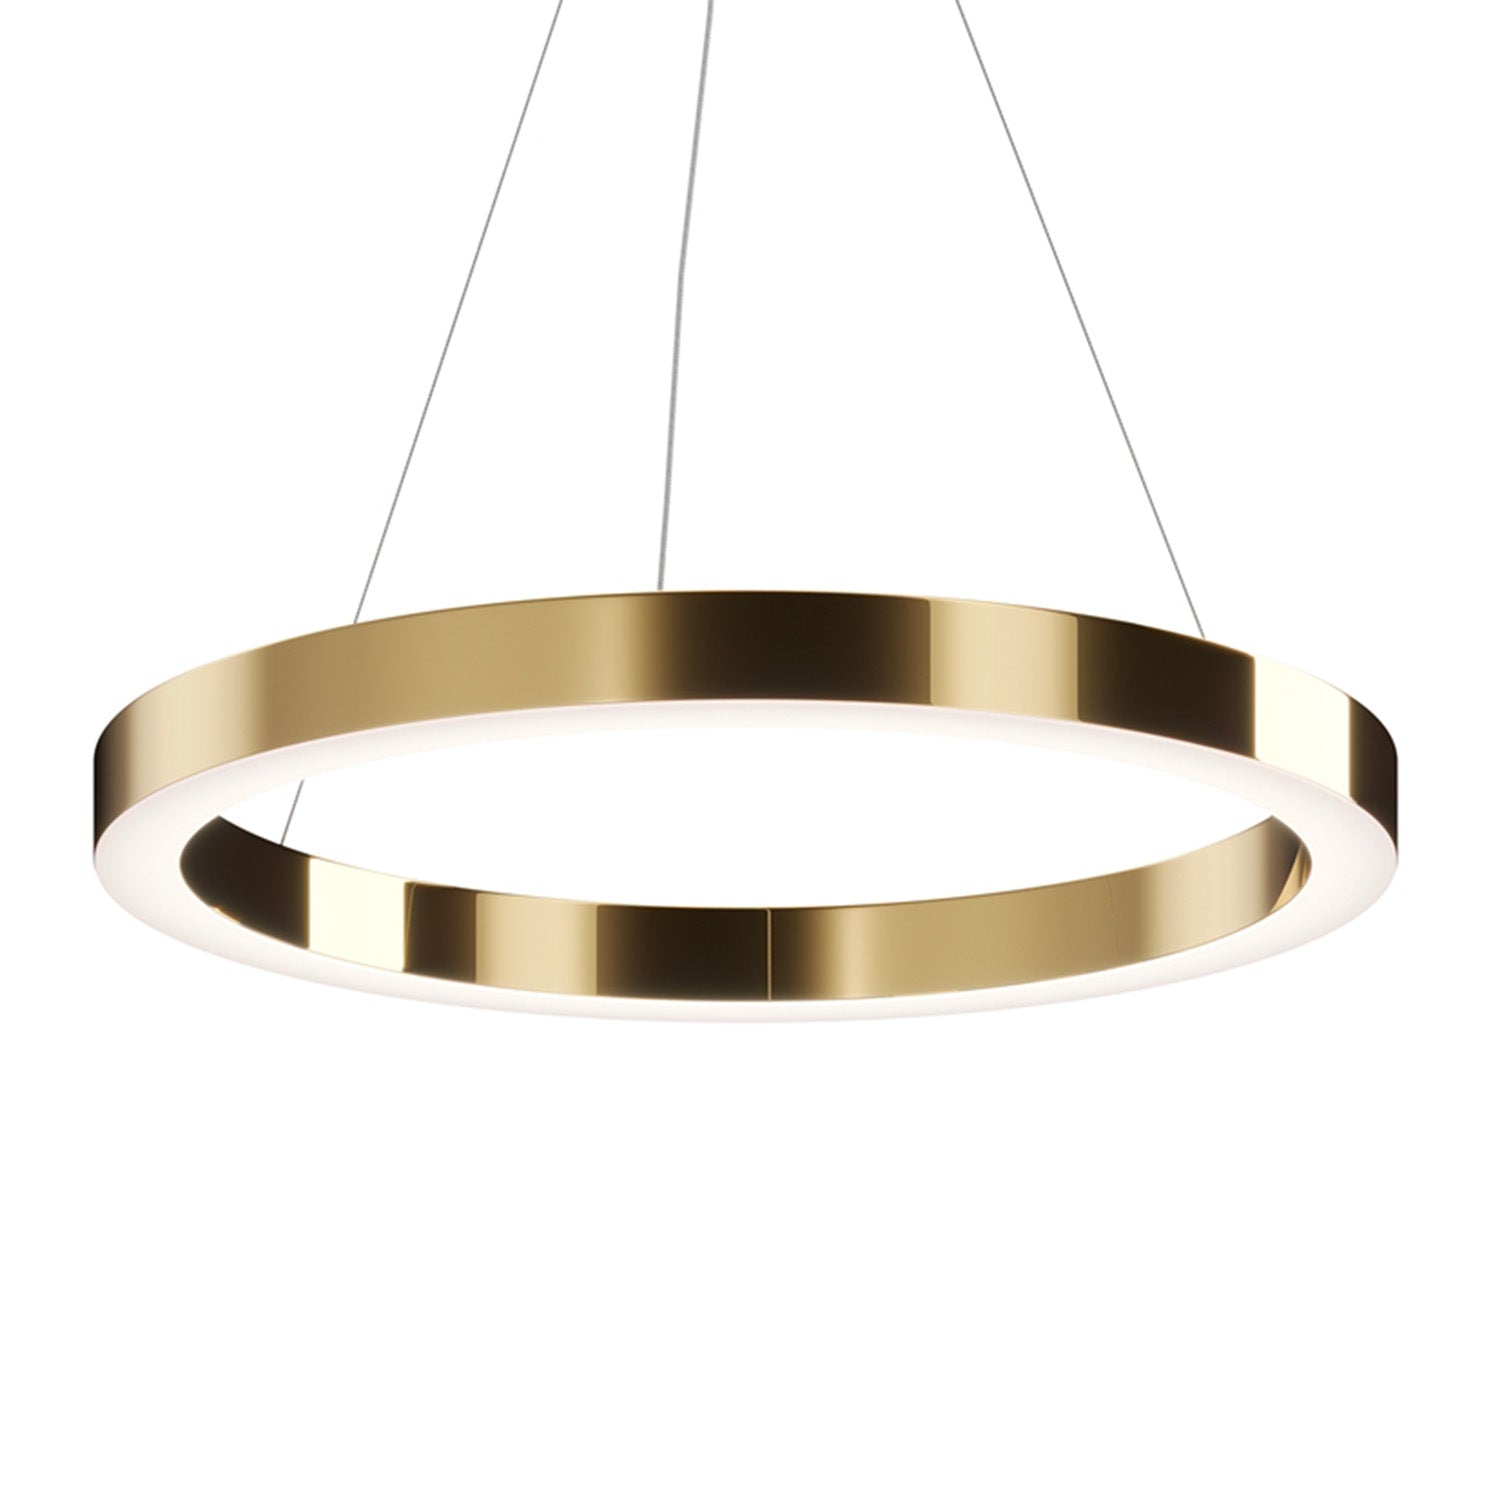 SATURNO - Modern pendant light with integrated LED golden ring